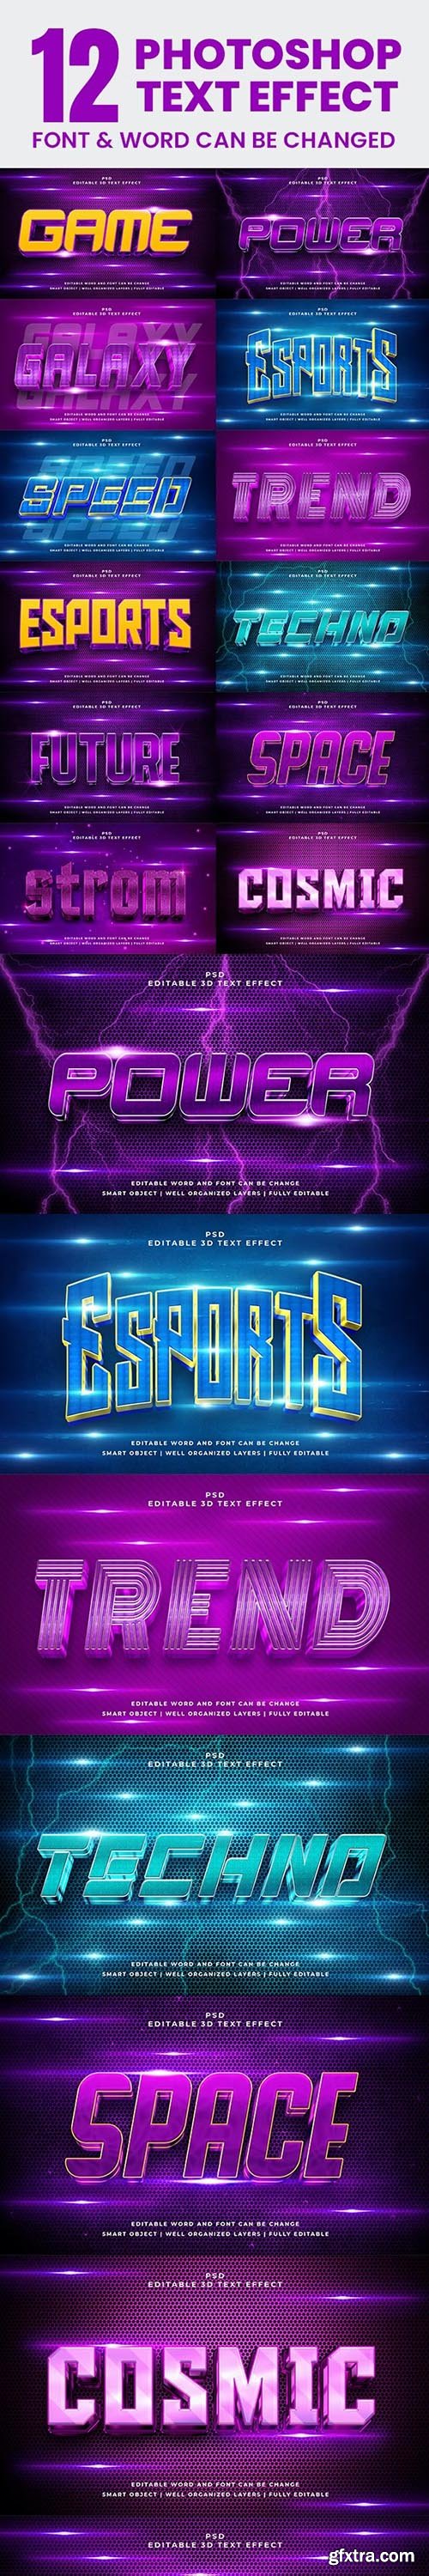 Graphicriver - 12 Best 3D Editable Text Effect Style for Photoshop Pack 44459200